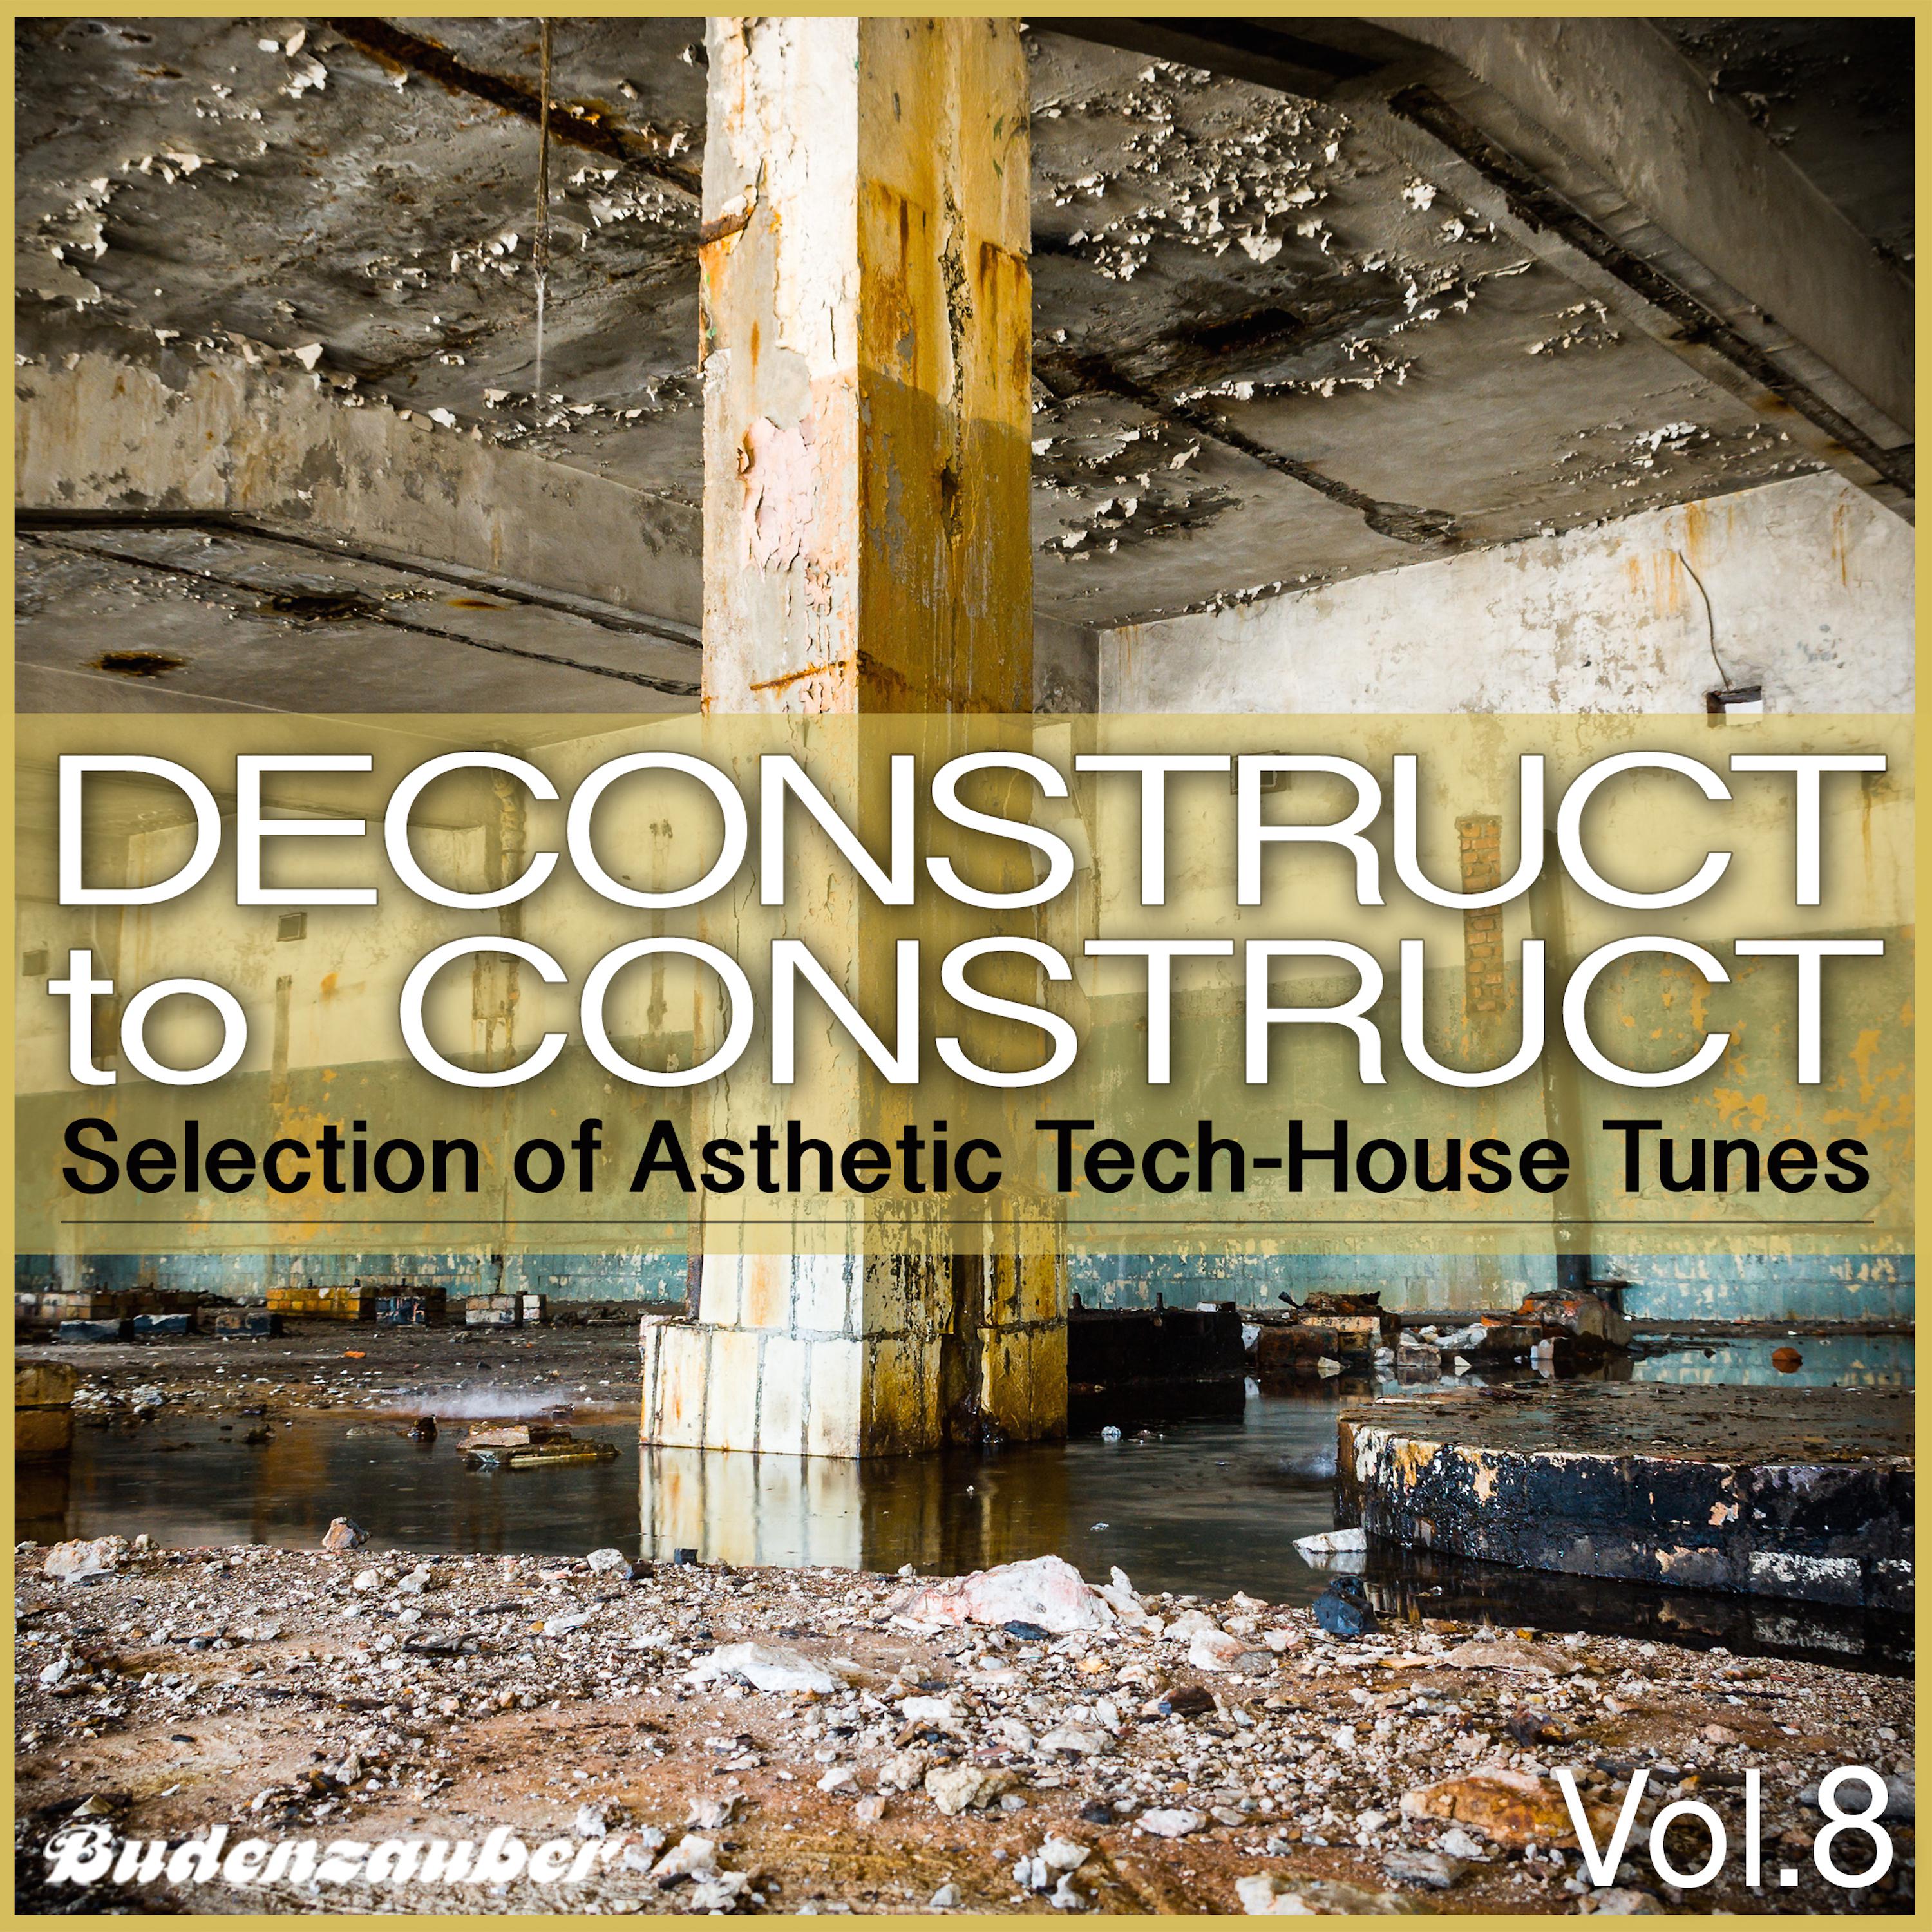 Deconstruct to Construct, Vol. 8 - Selection of Asthetic Tech-House Tunes